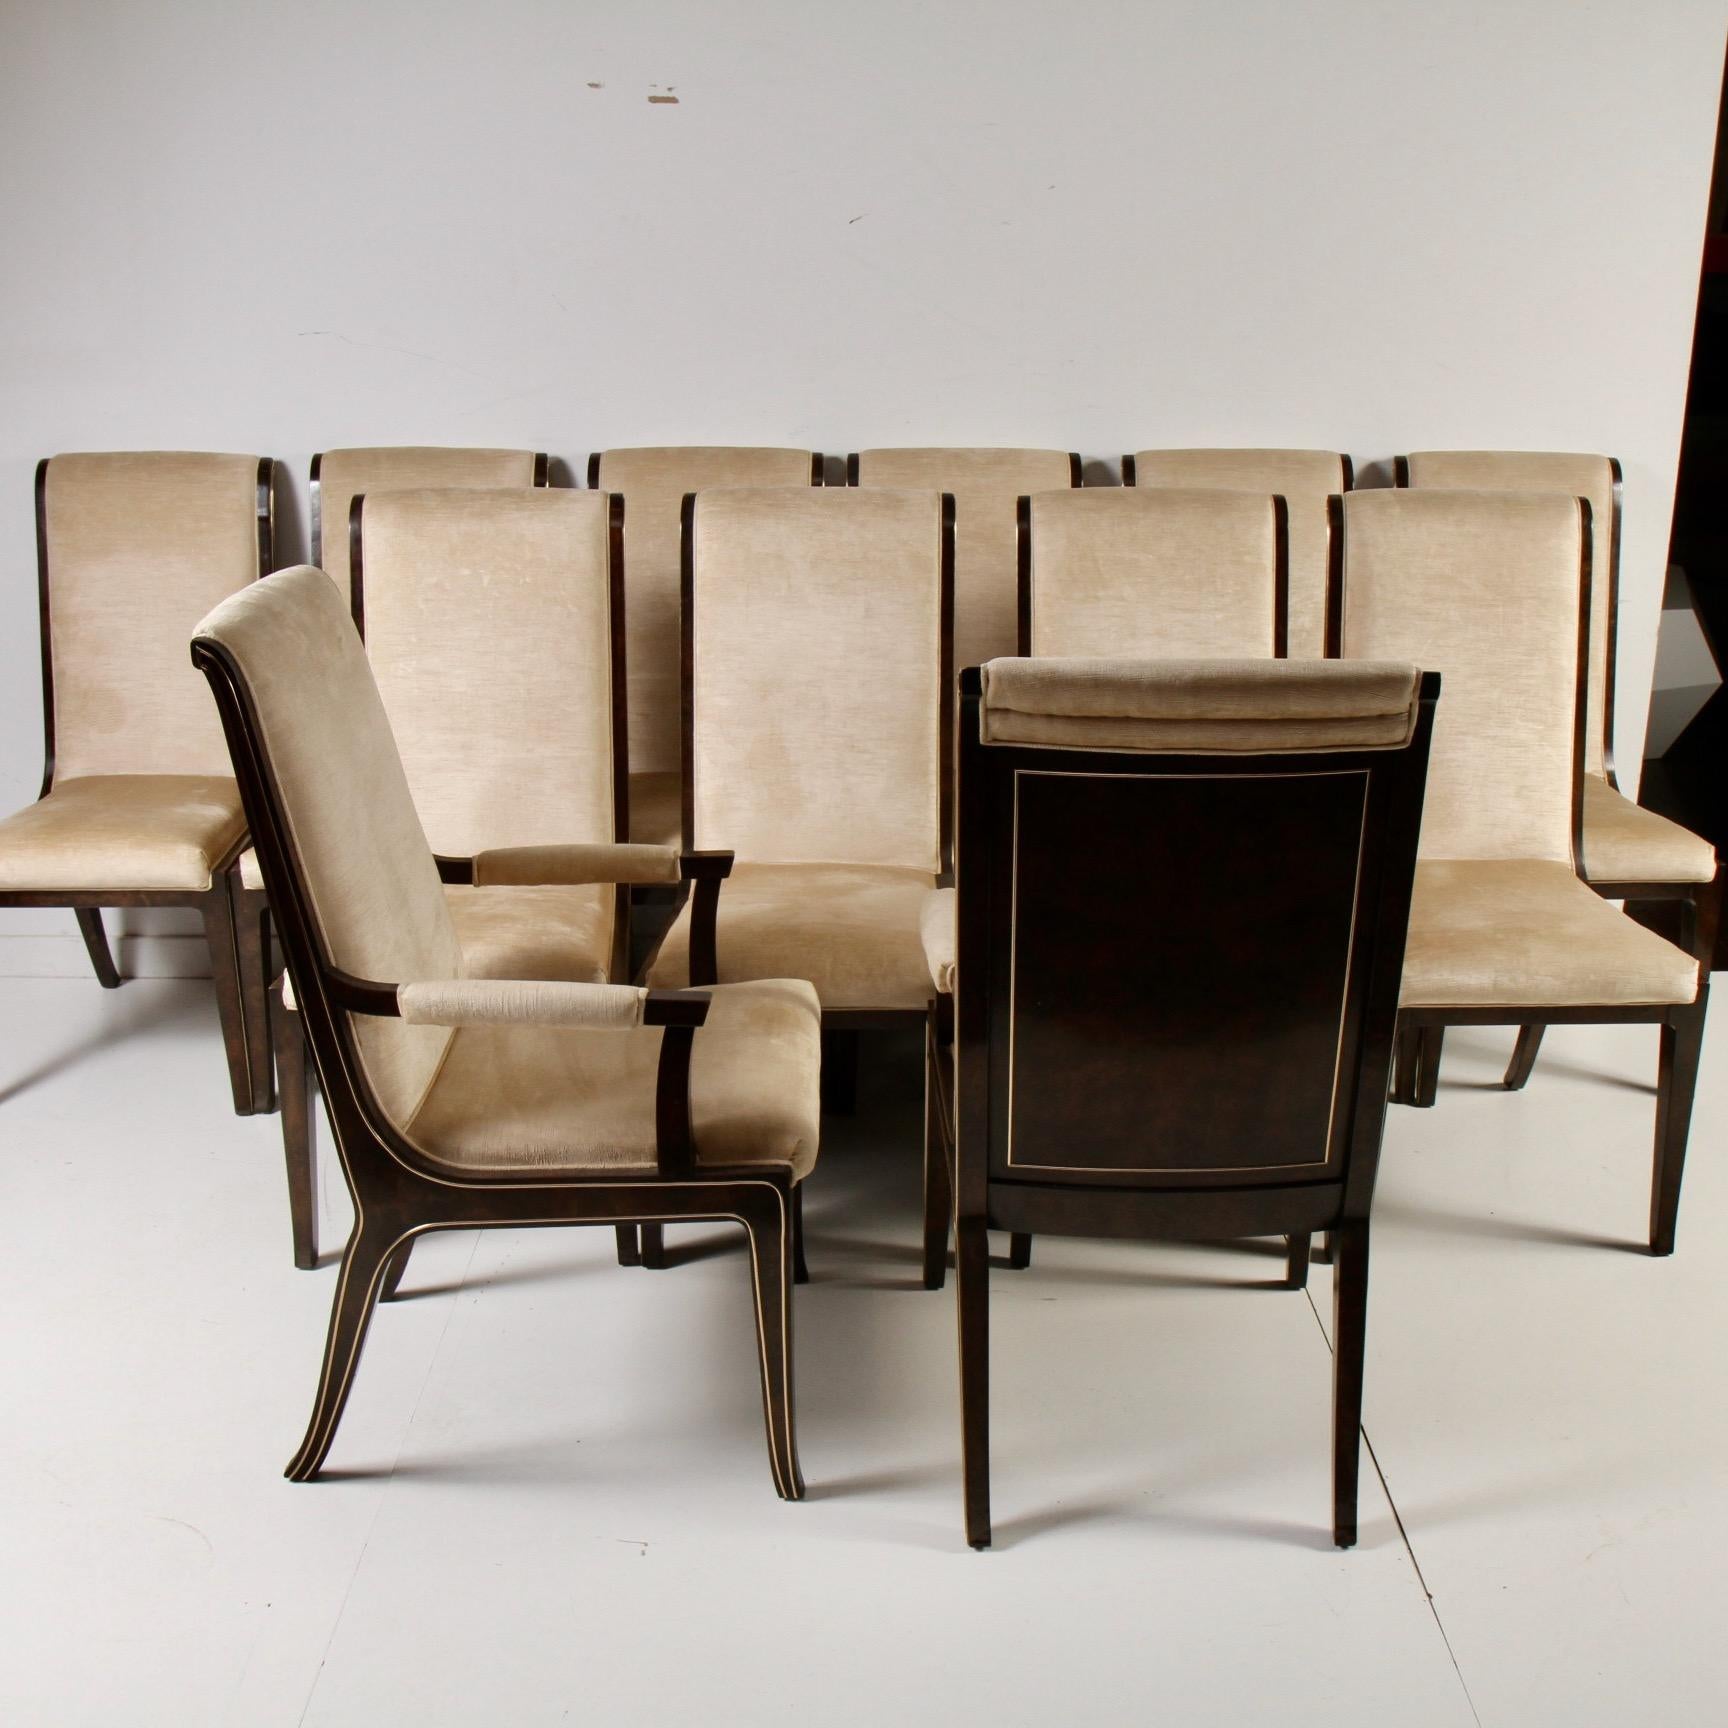 Clean, original set of ten side and two armchairs designed by Bernhard Rohne for luxury furniture maker Mastercraft. Chairs are upholstered in champagne velvet with brass inlay trim. Dining table for this set is in another of my